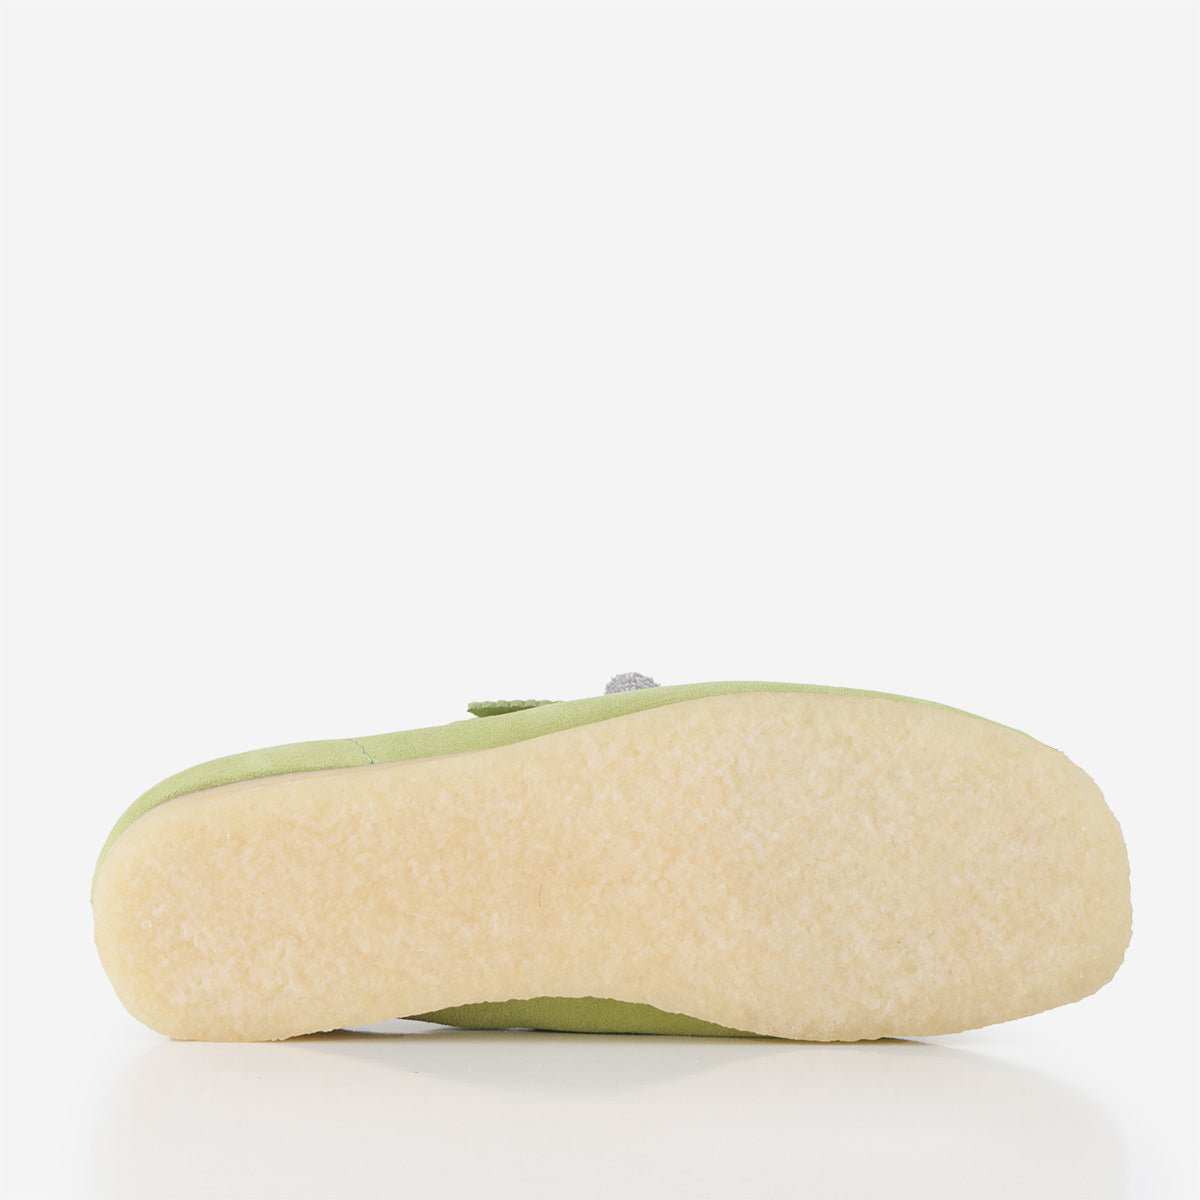 Clarks Originals Wallabee Shoes - Pale Lime Suede – Urban Industry